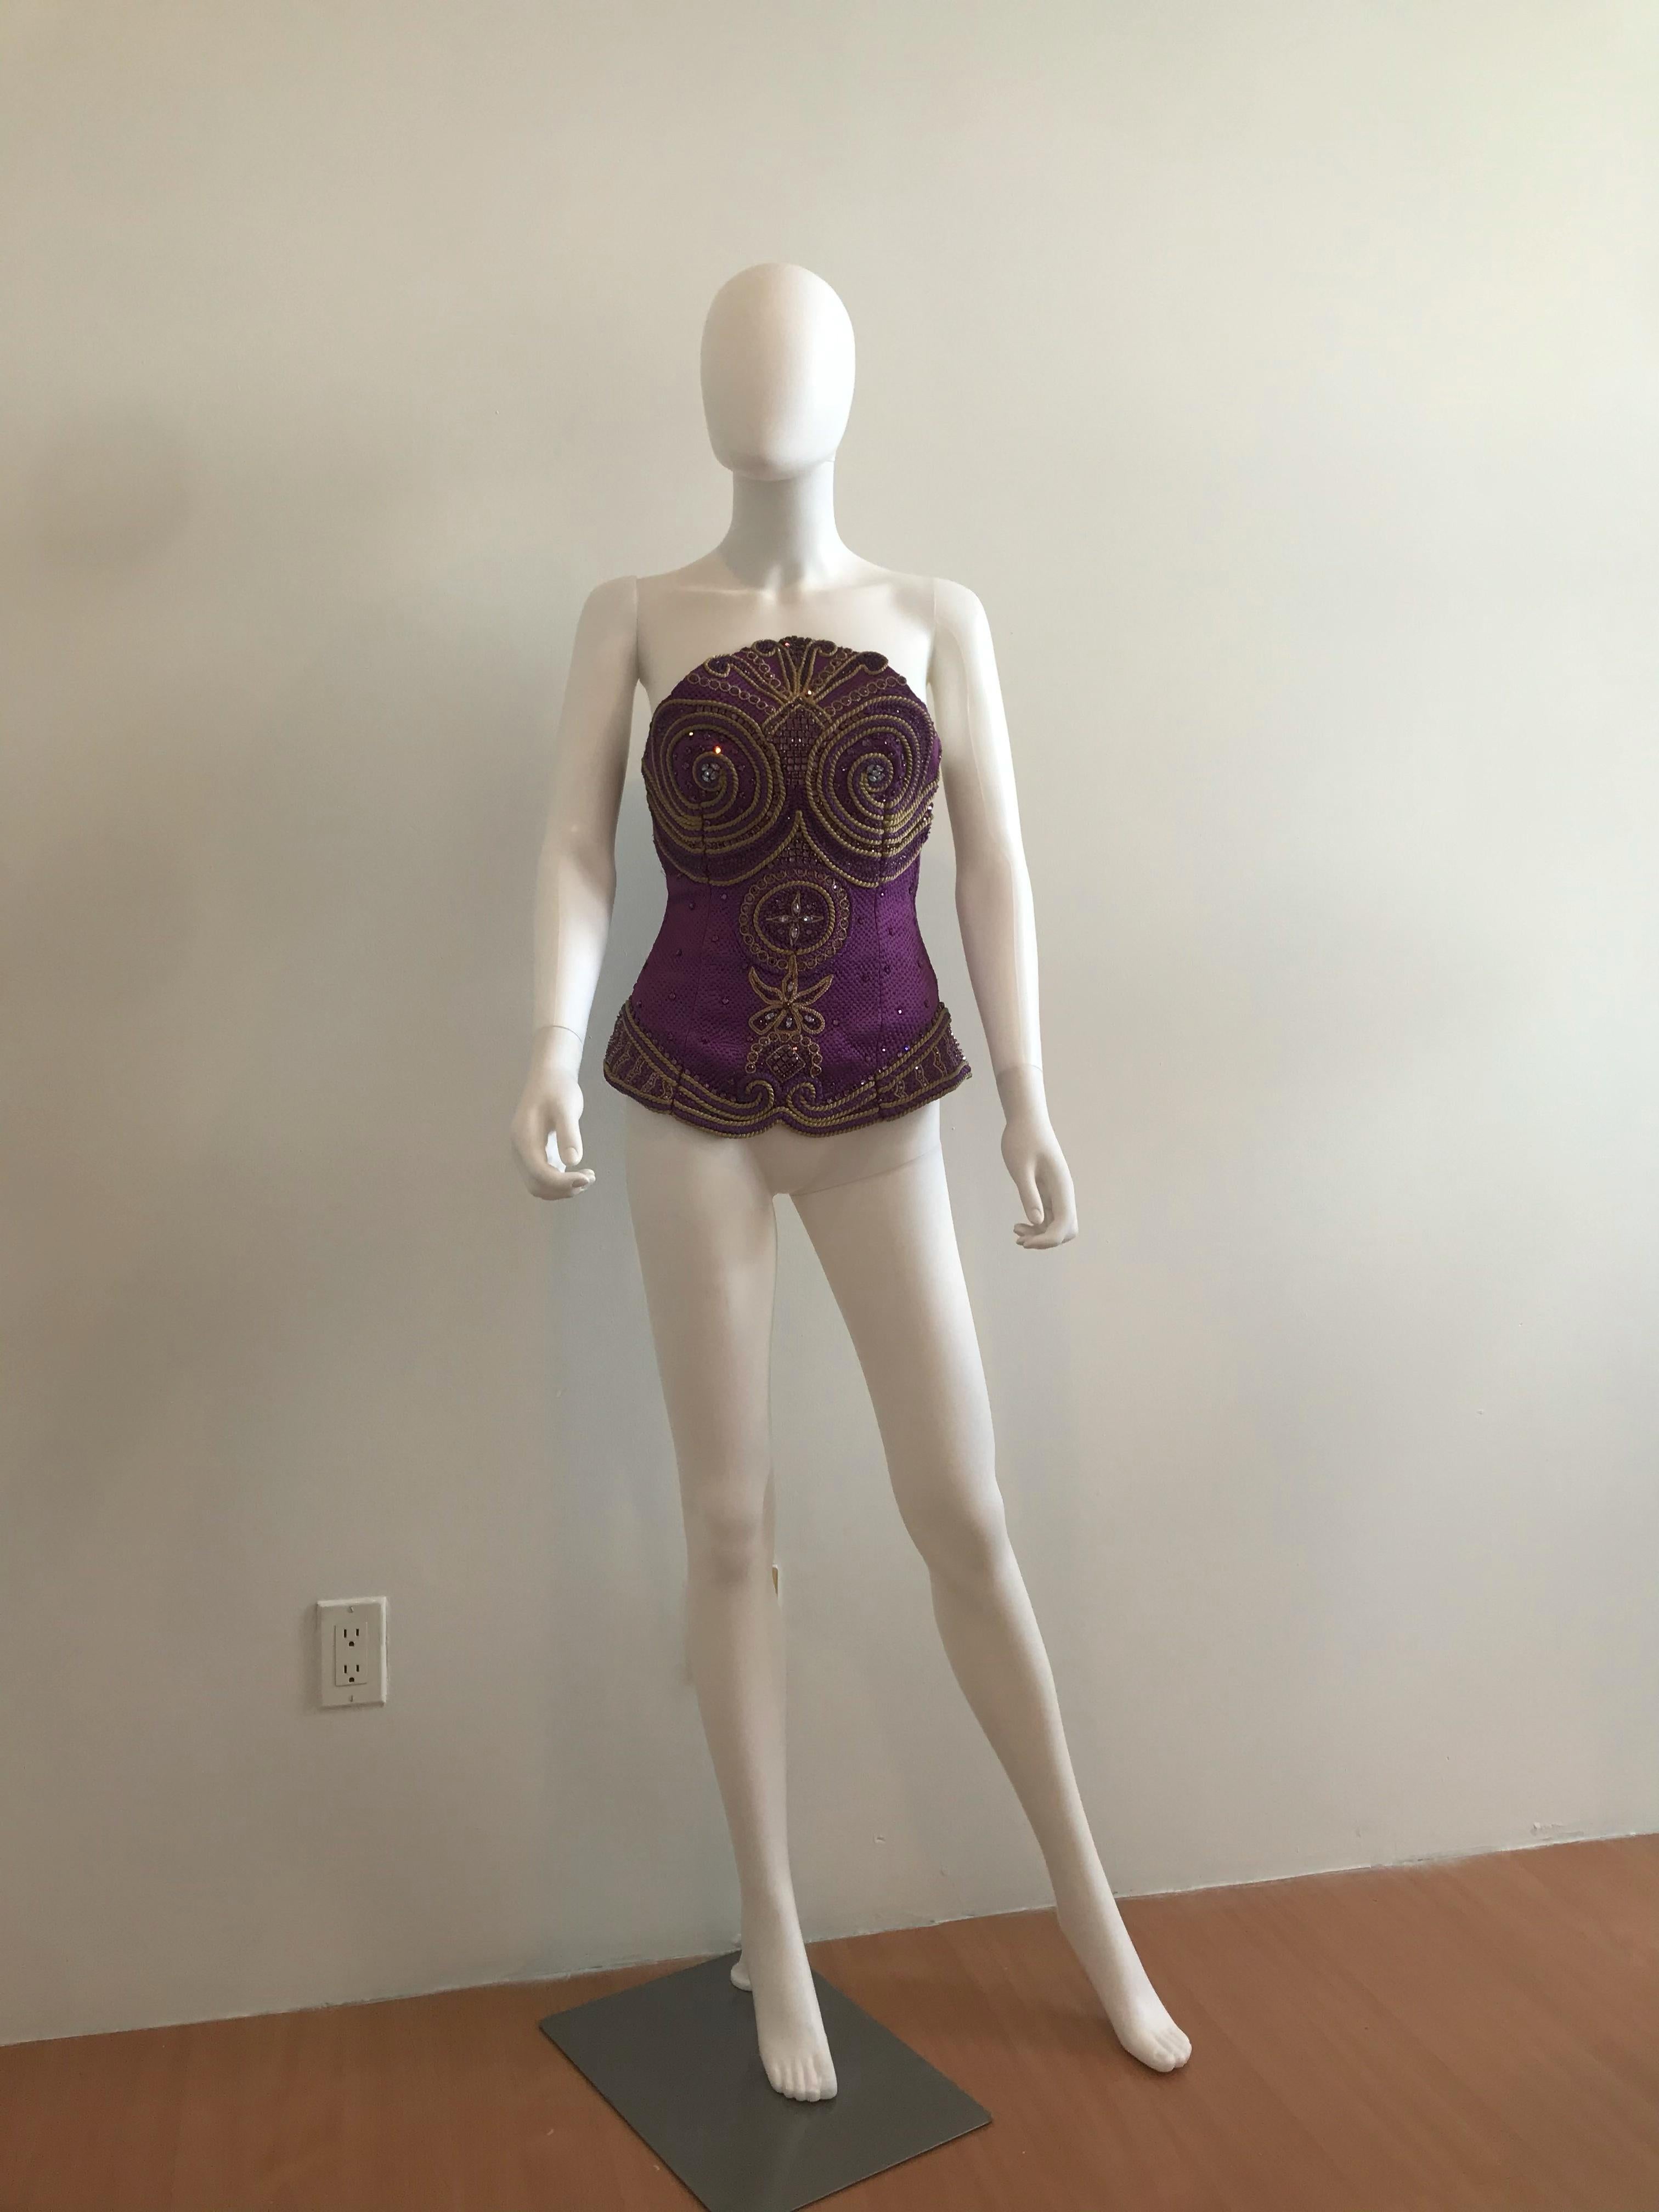 Gianni Versace Couture Purple & Gold Embellished & Embroidered Bustier/Corset with gold embroidery and purple rhinestone detailing. This rare bustier has a nautical motif with its exquisite neckline. Made in Italy. Size tag removed. Fits